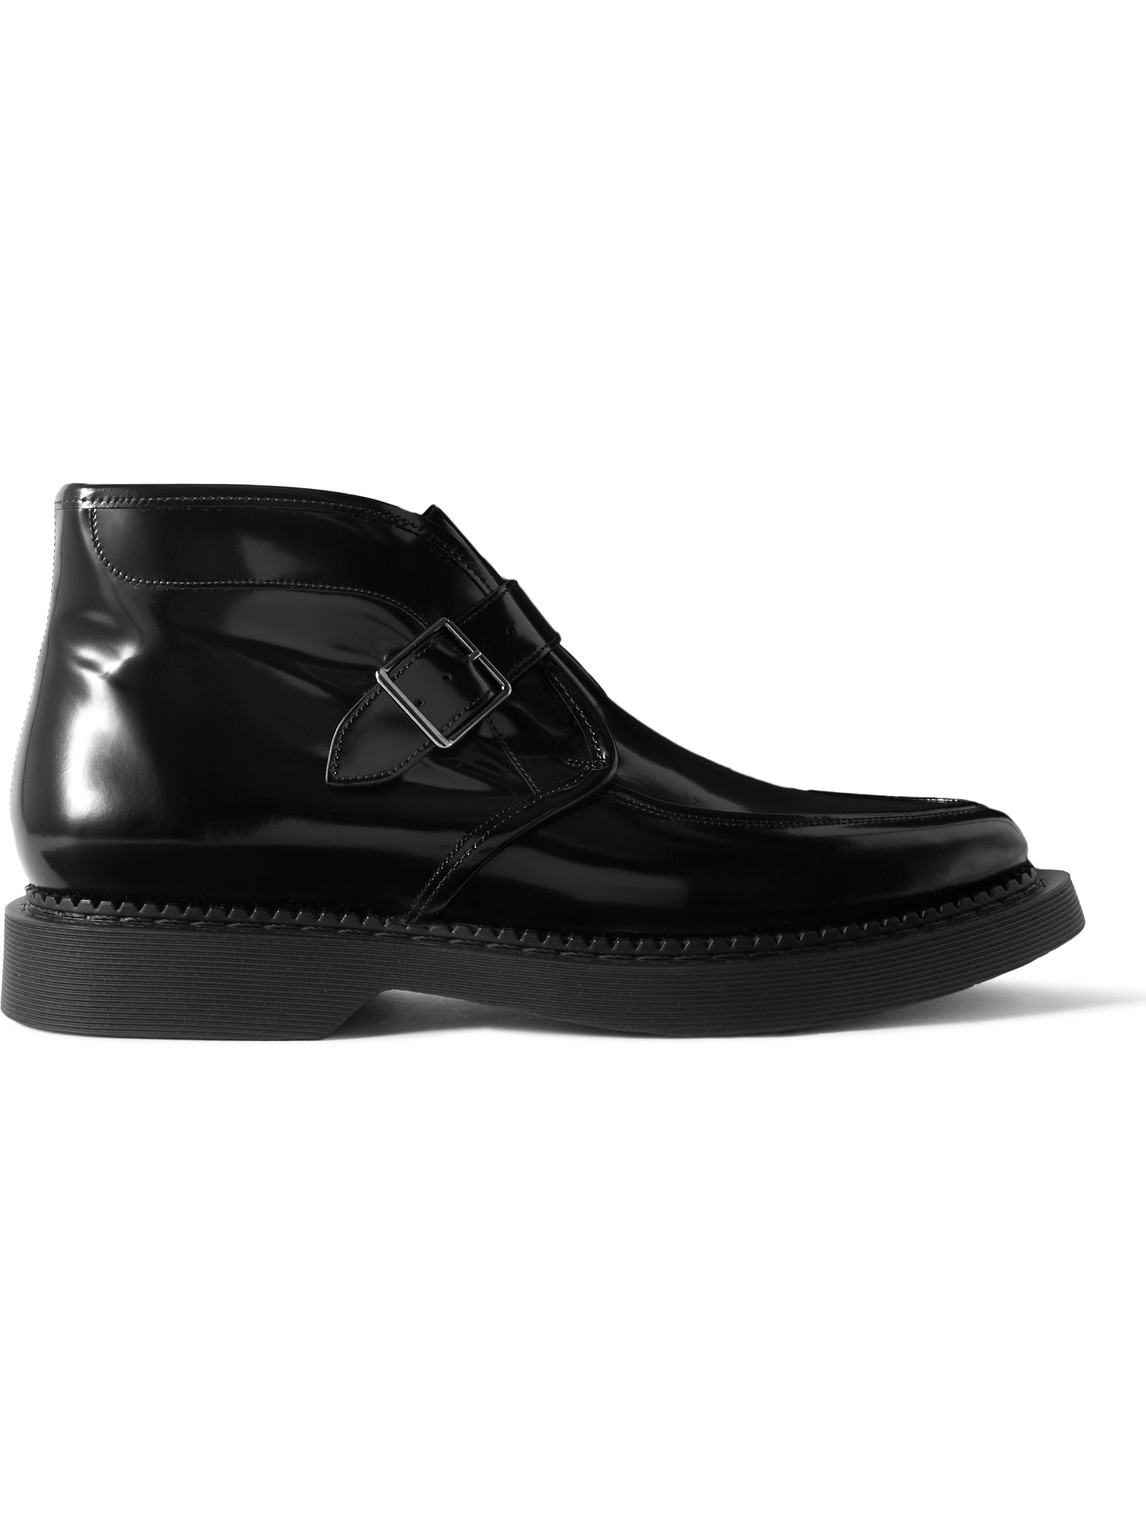 Teddy Polished-Leather Monk-Strap Boots